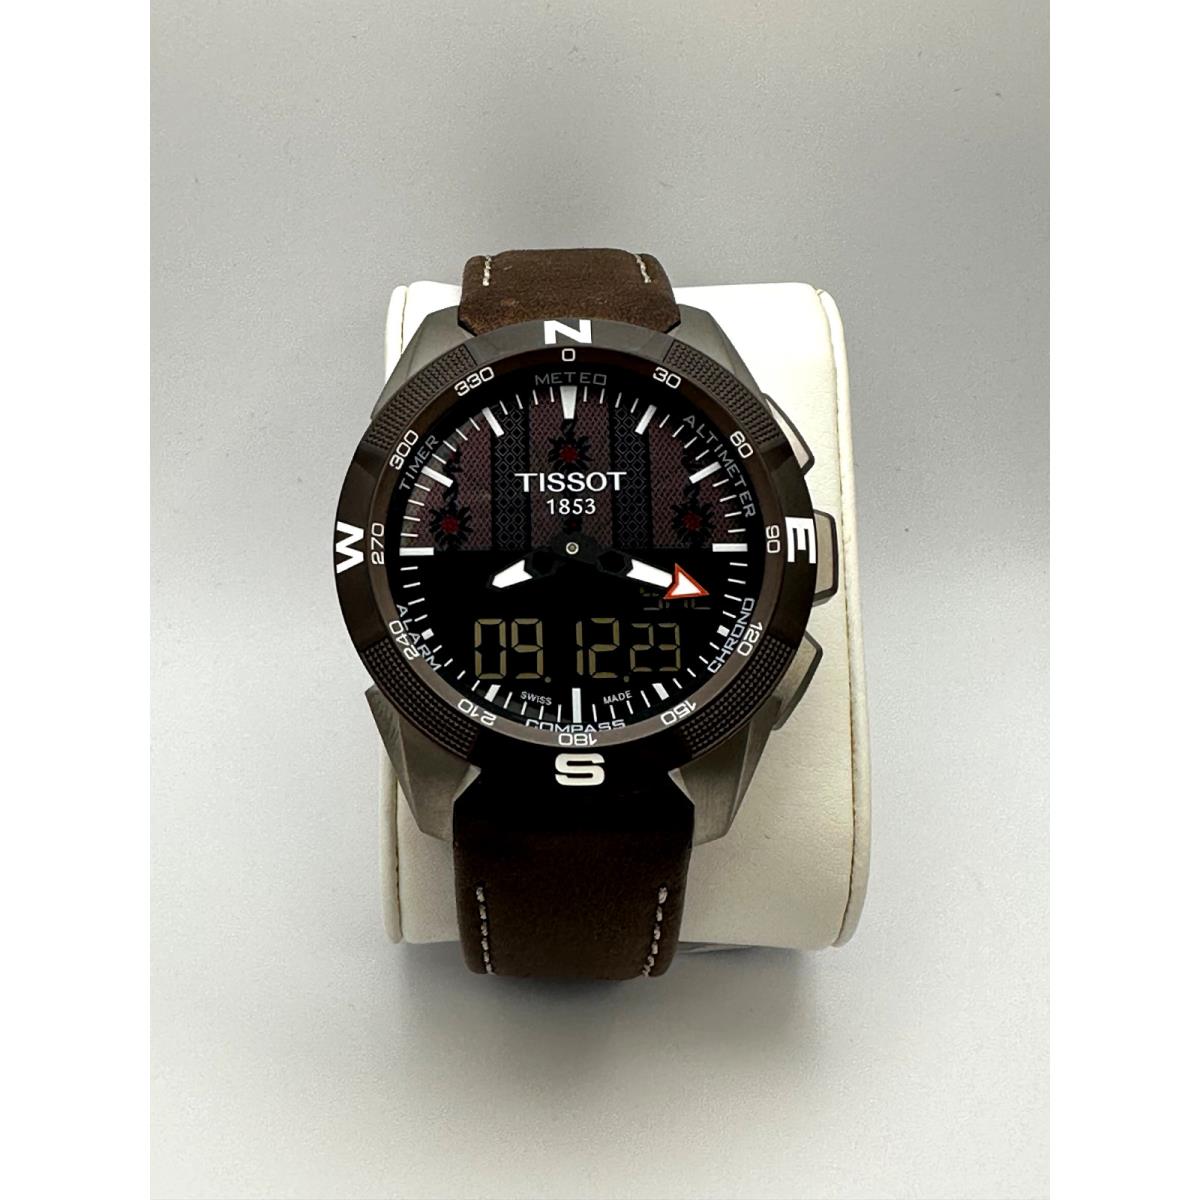 Tissot T-touch Solar Brown Leather Swiss Digital Analog Watch T1104204605100